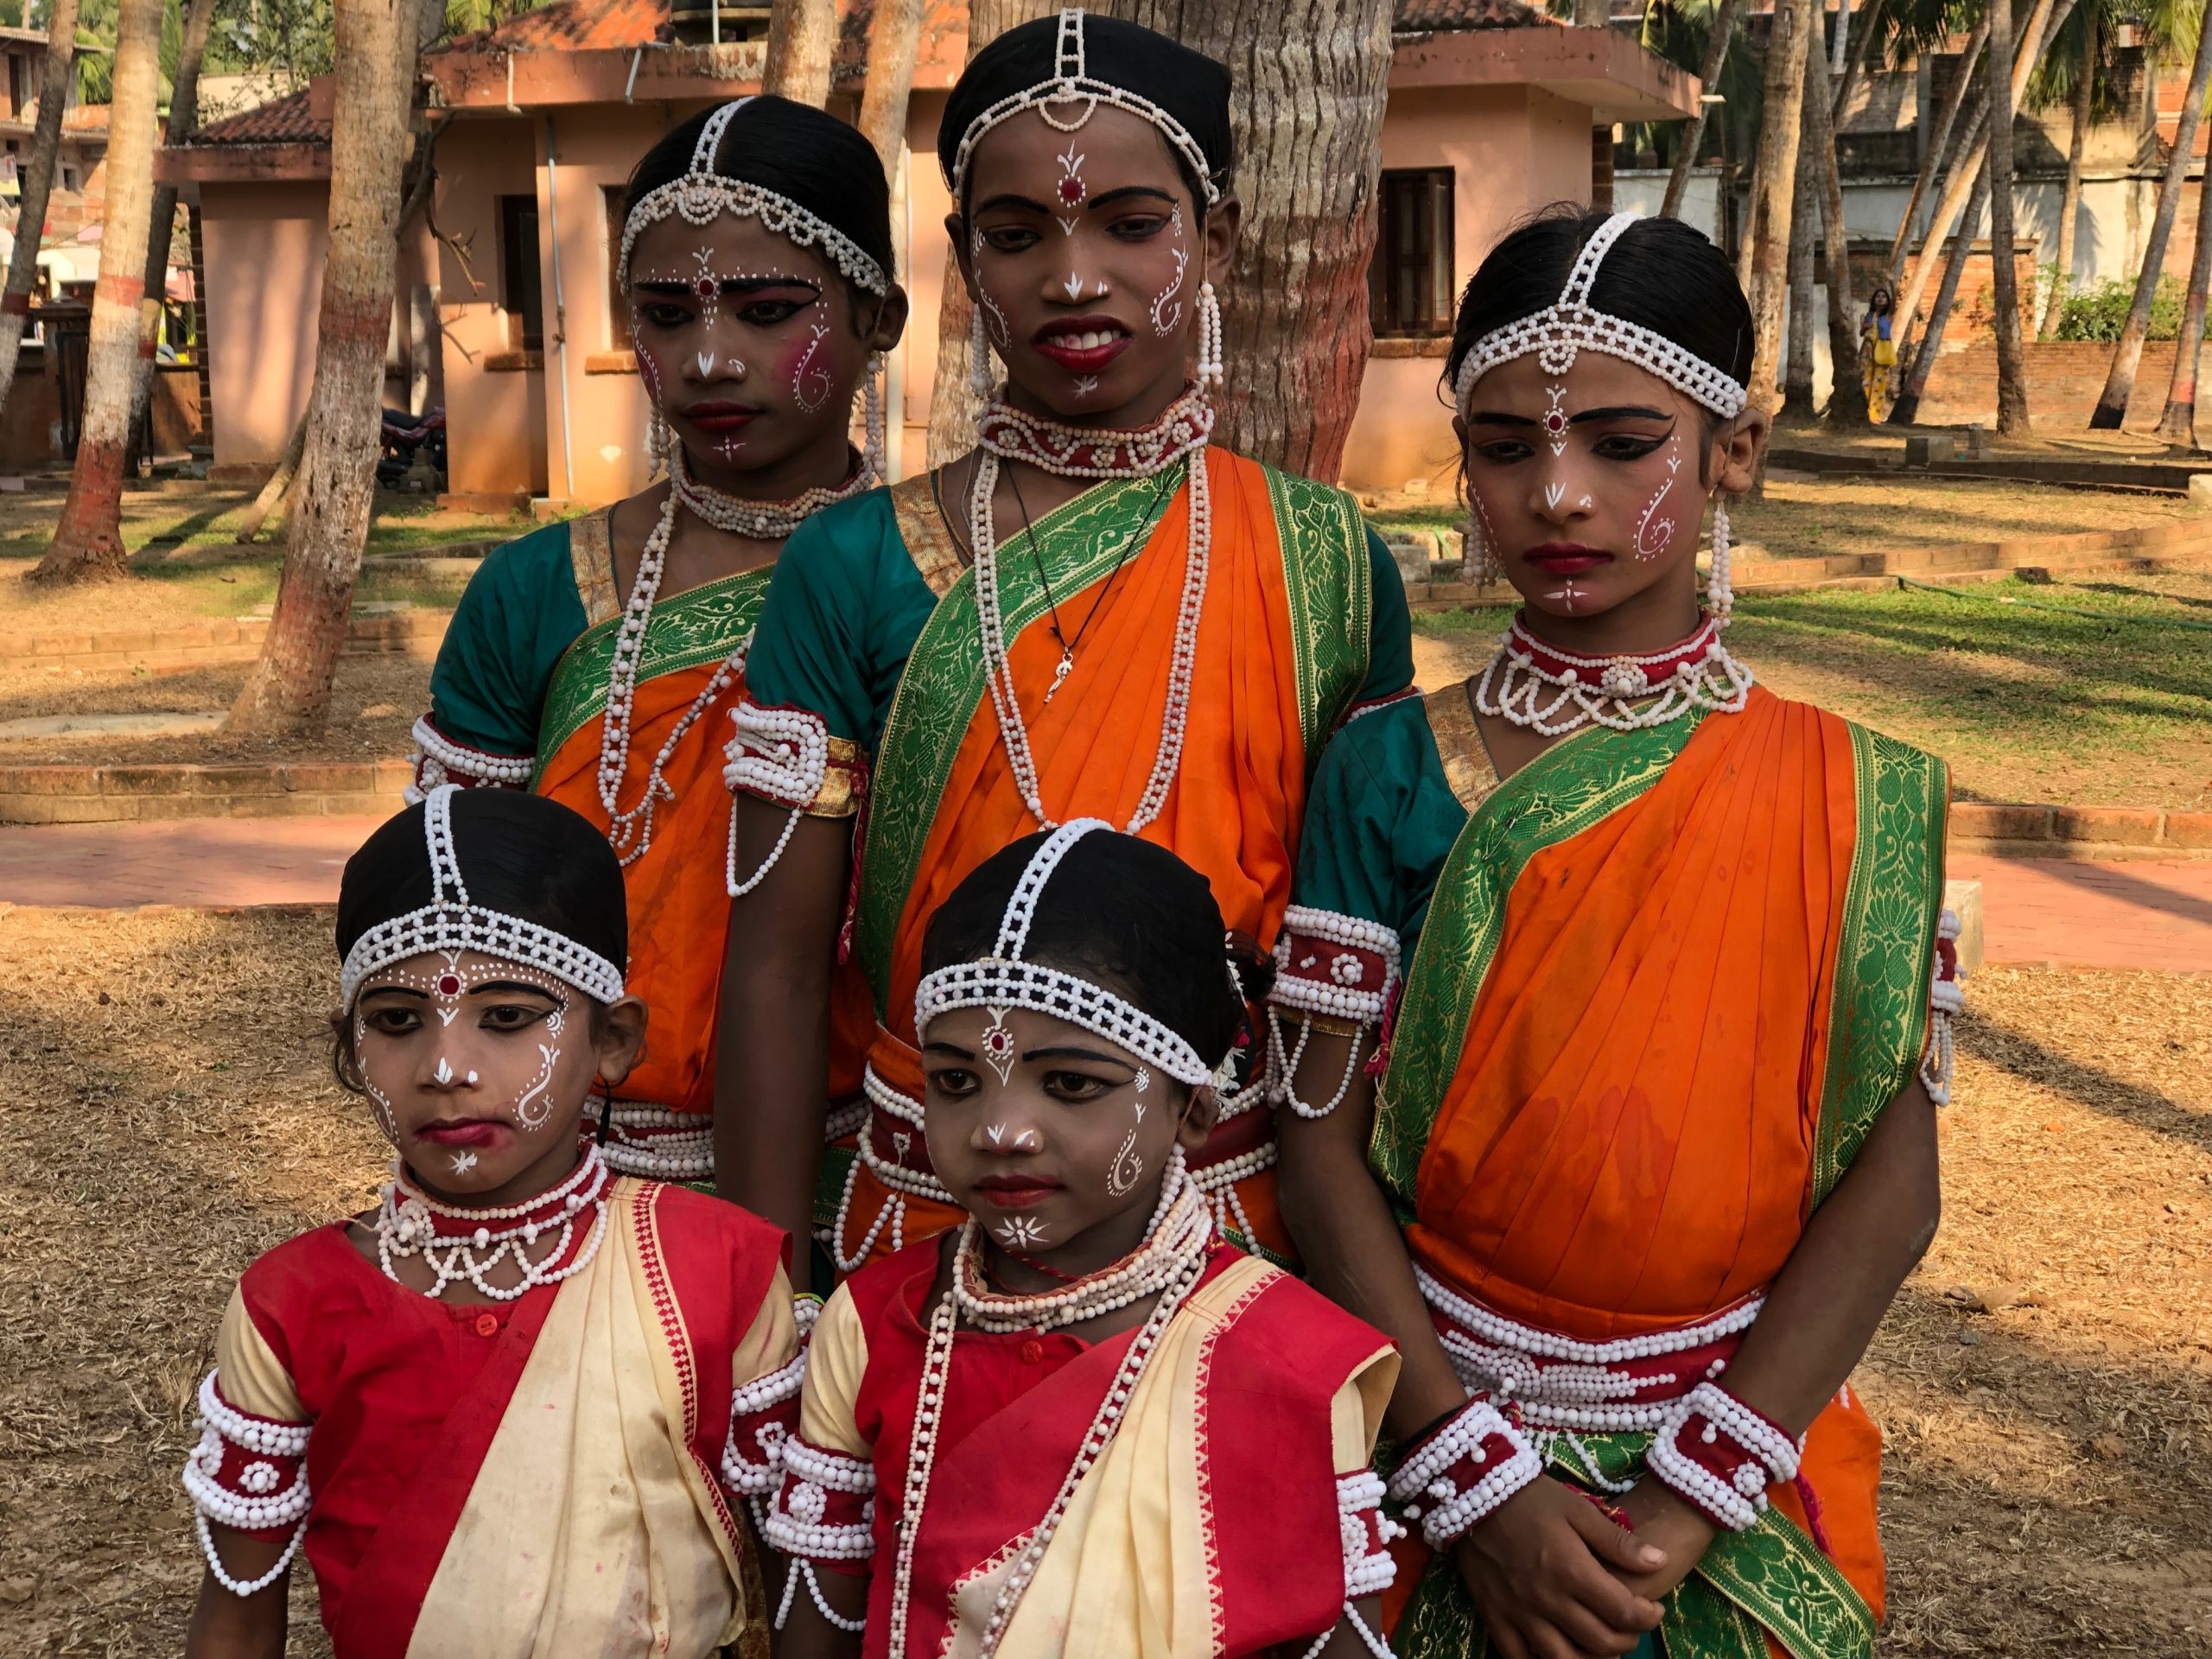 Puri India December 2019 Unidentified Young Gotipua Dancer Traditional  Heritage – Stock Editorial Photo © dtemps #407105022